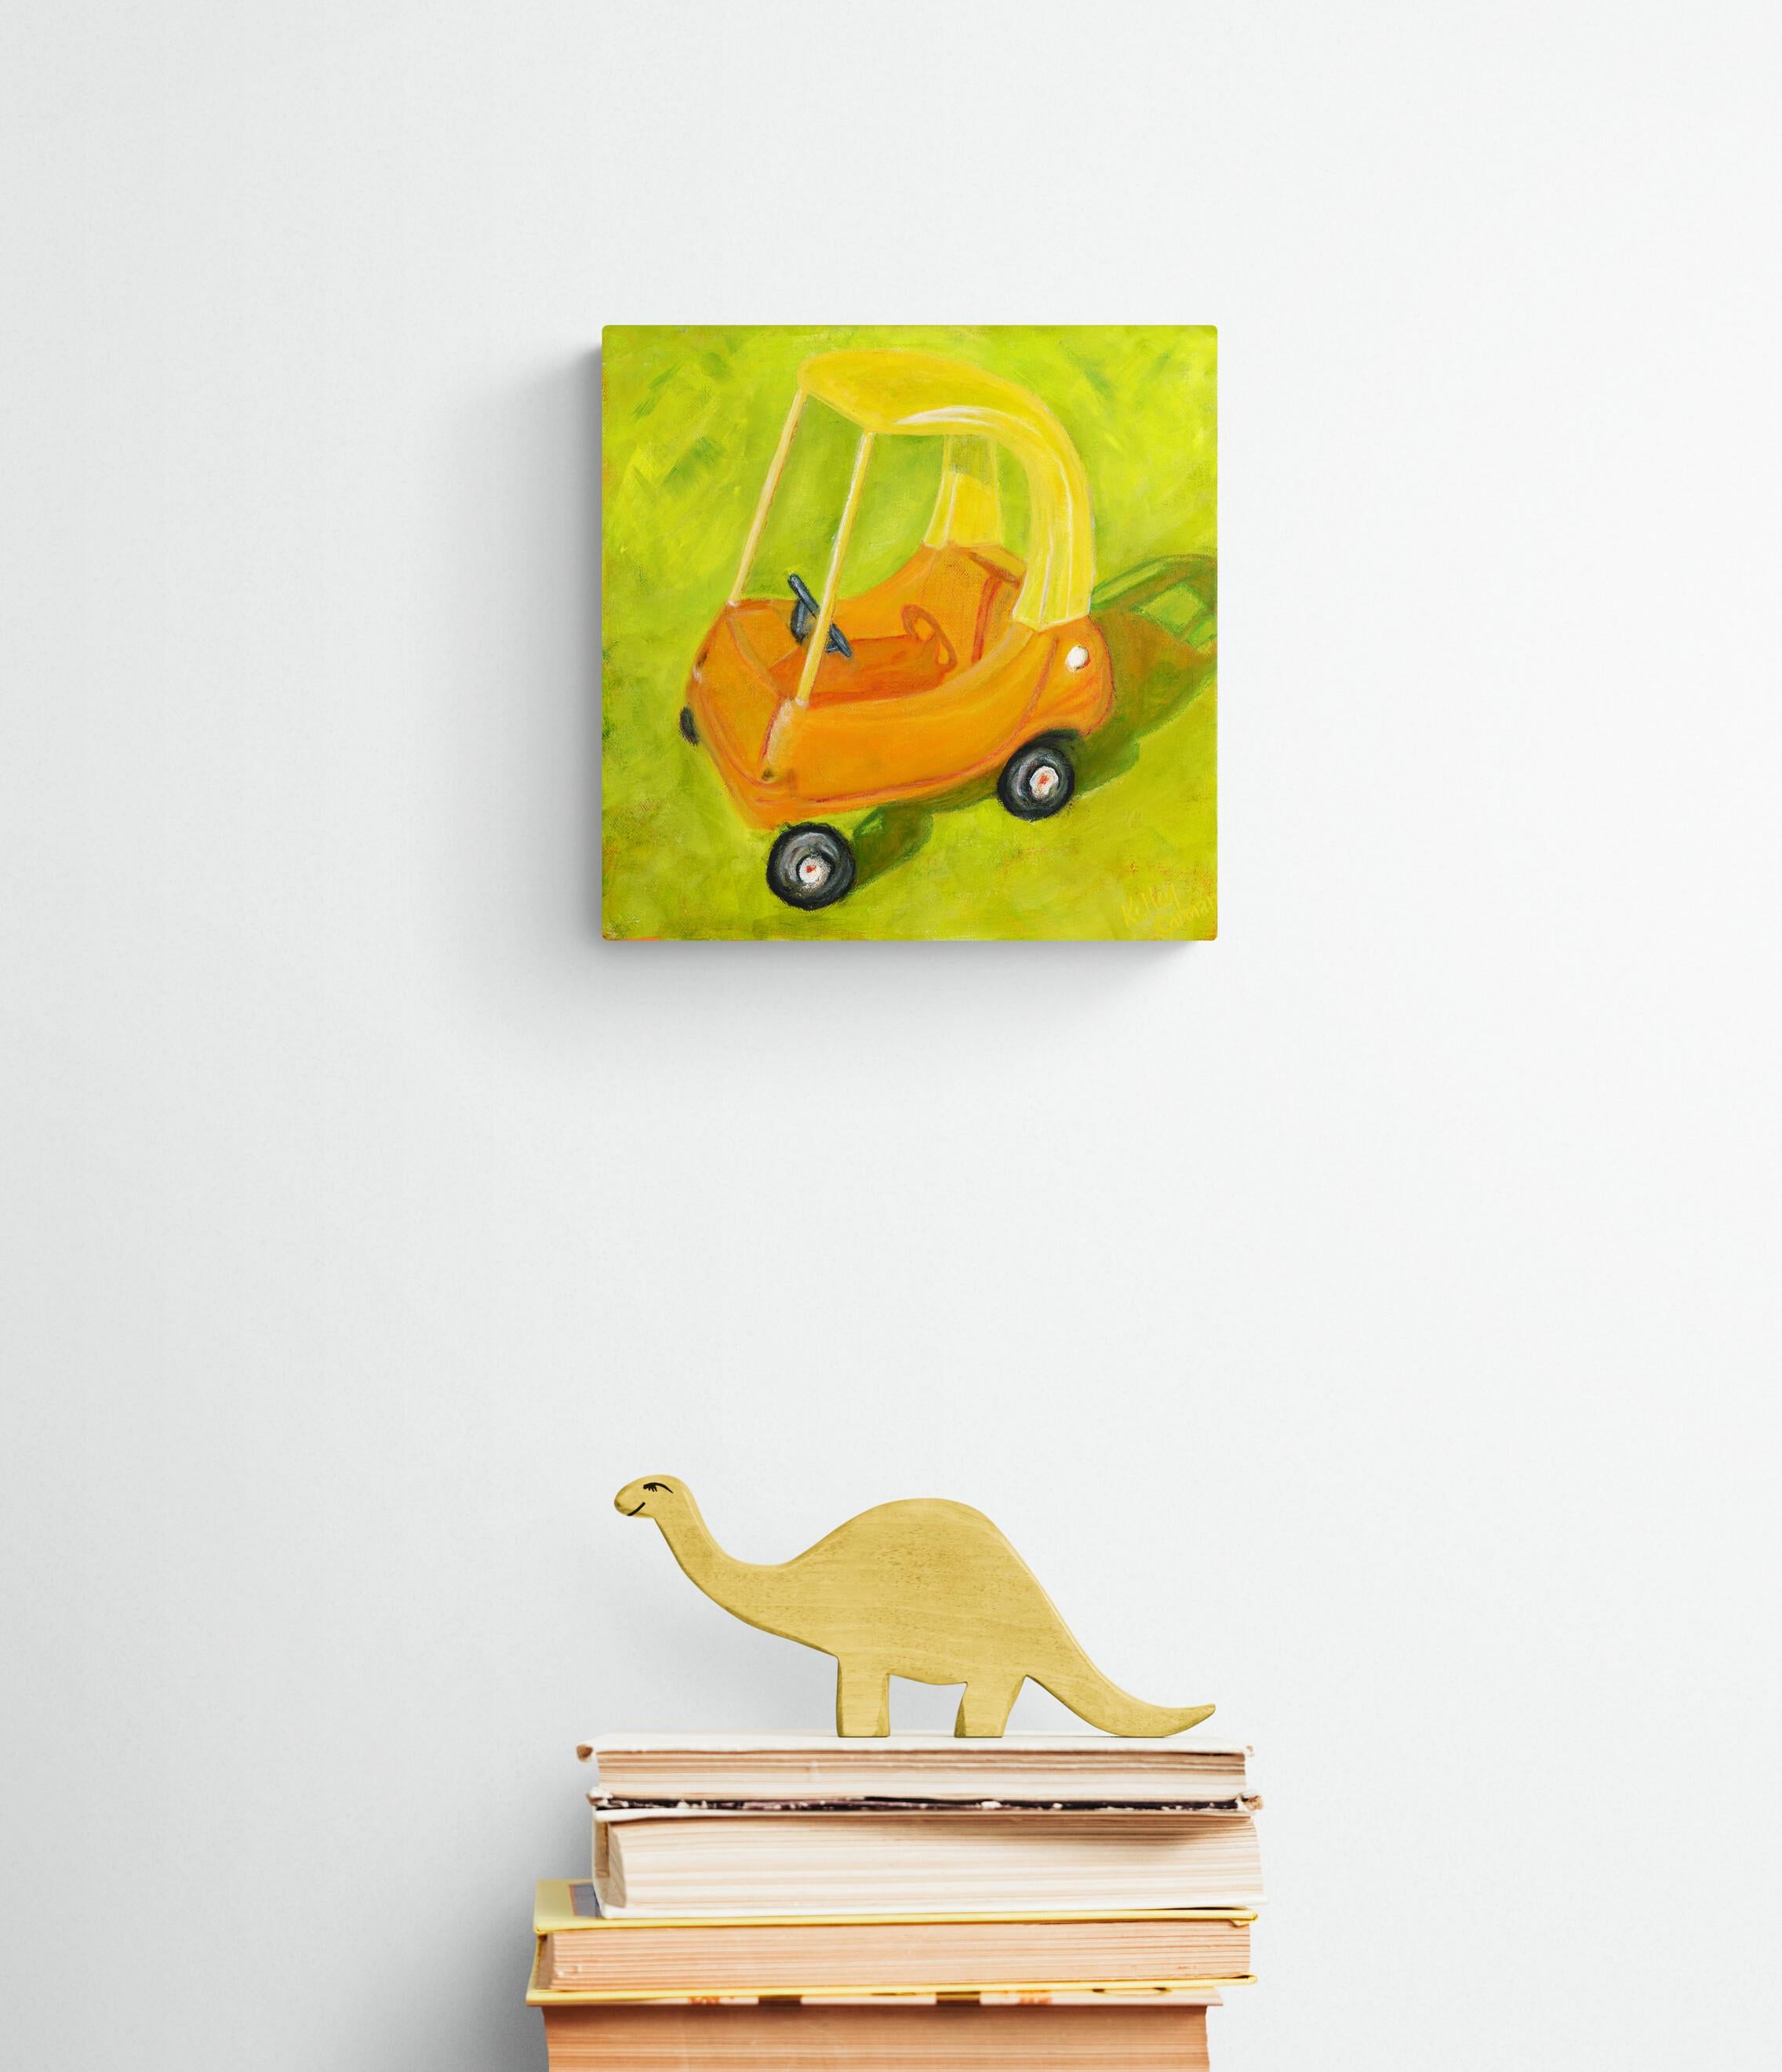 Kelley Carman
First Car (Figurative, Cozy, Coupe, Yellow, Orange, Green, Car)
Acrylic and Oil Stick
Year: 2022
Size: 12x12x1.5in
Signed
COA provided 
Ref.: 924802-2037

Tags: Figurative, Cozy, Coupe, Yellow, Orange, Green, Car  

